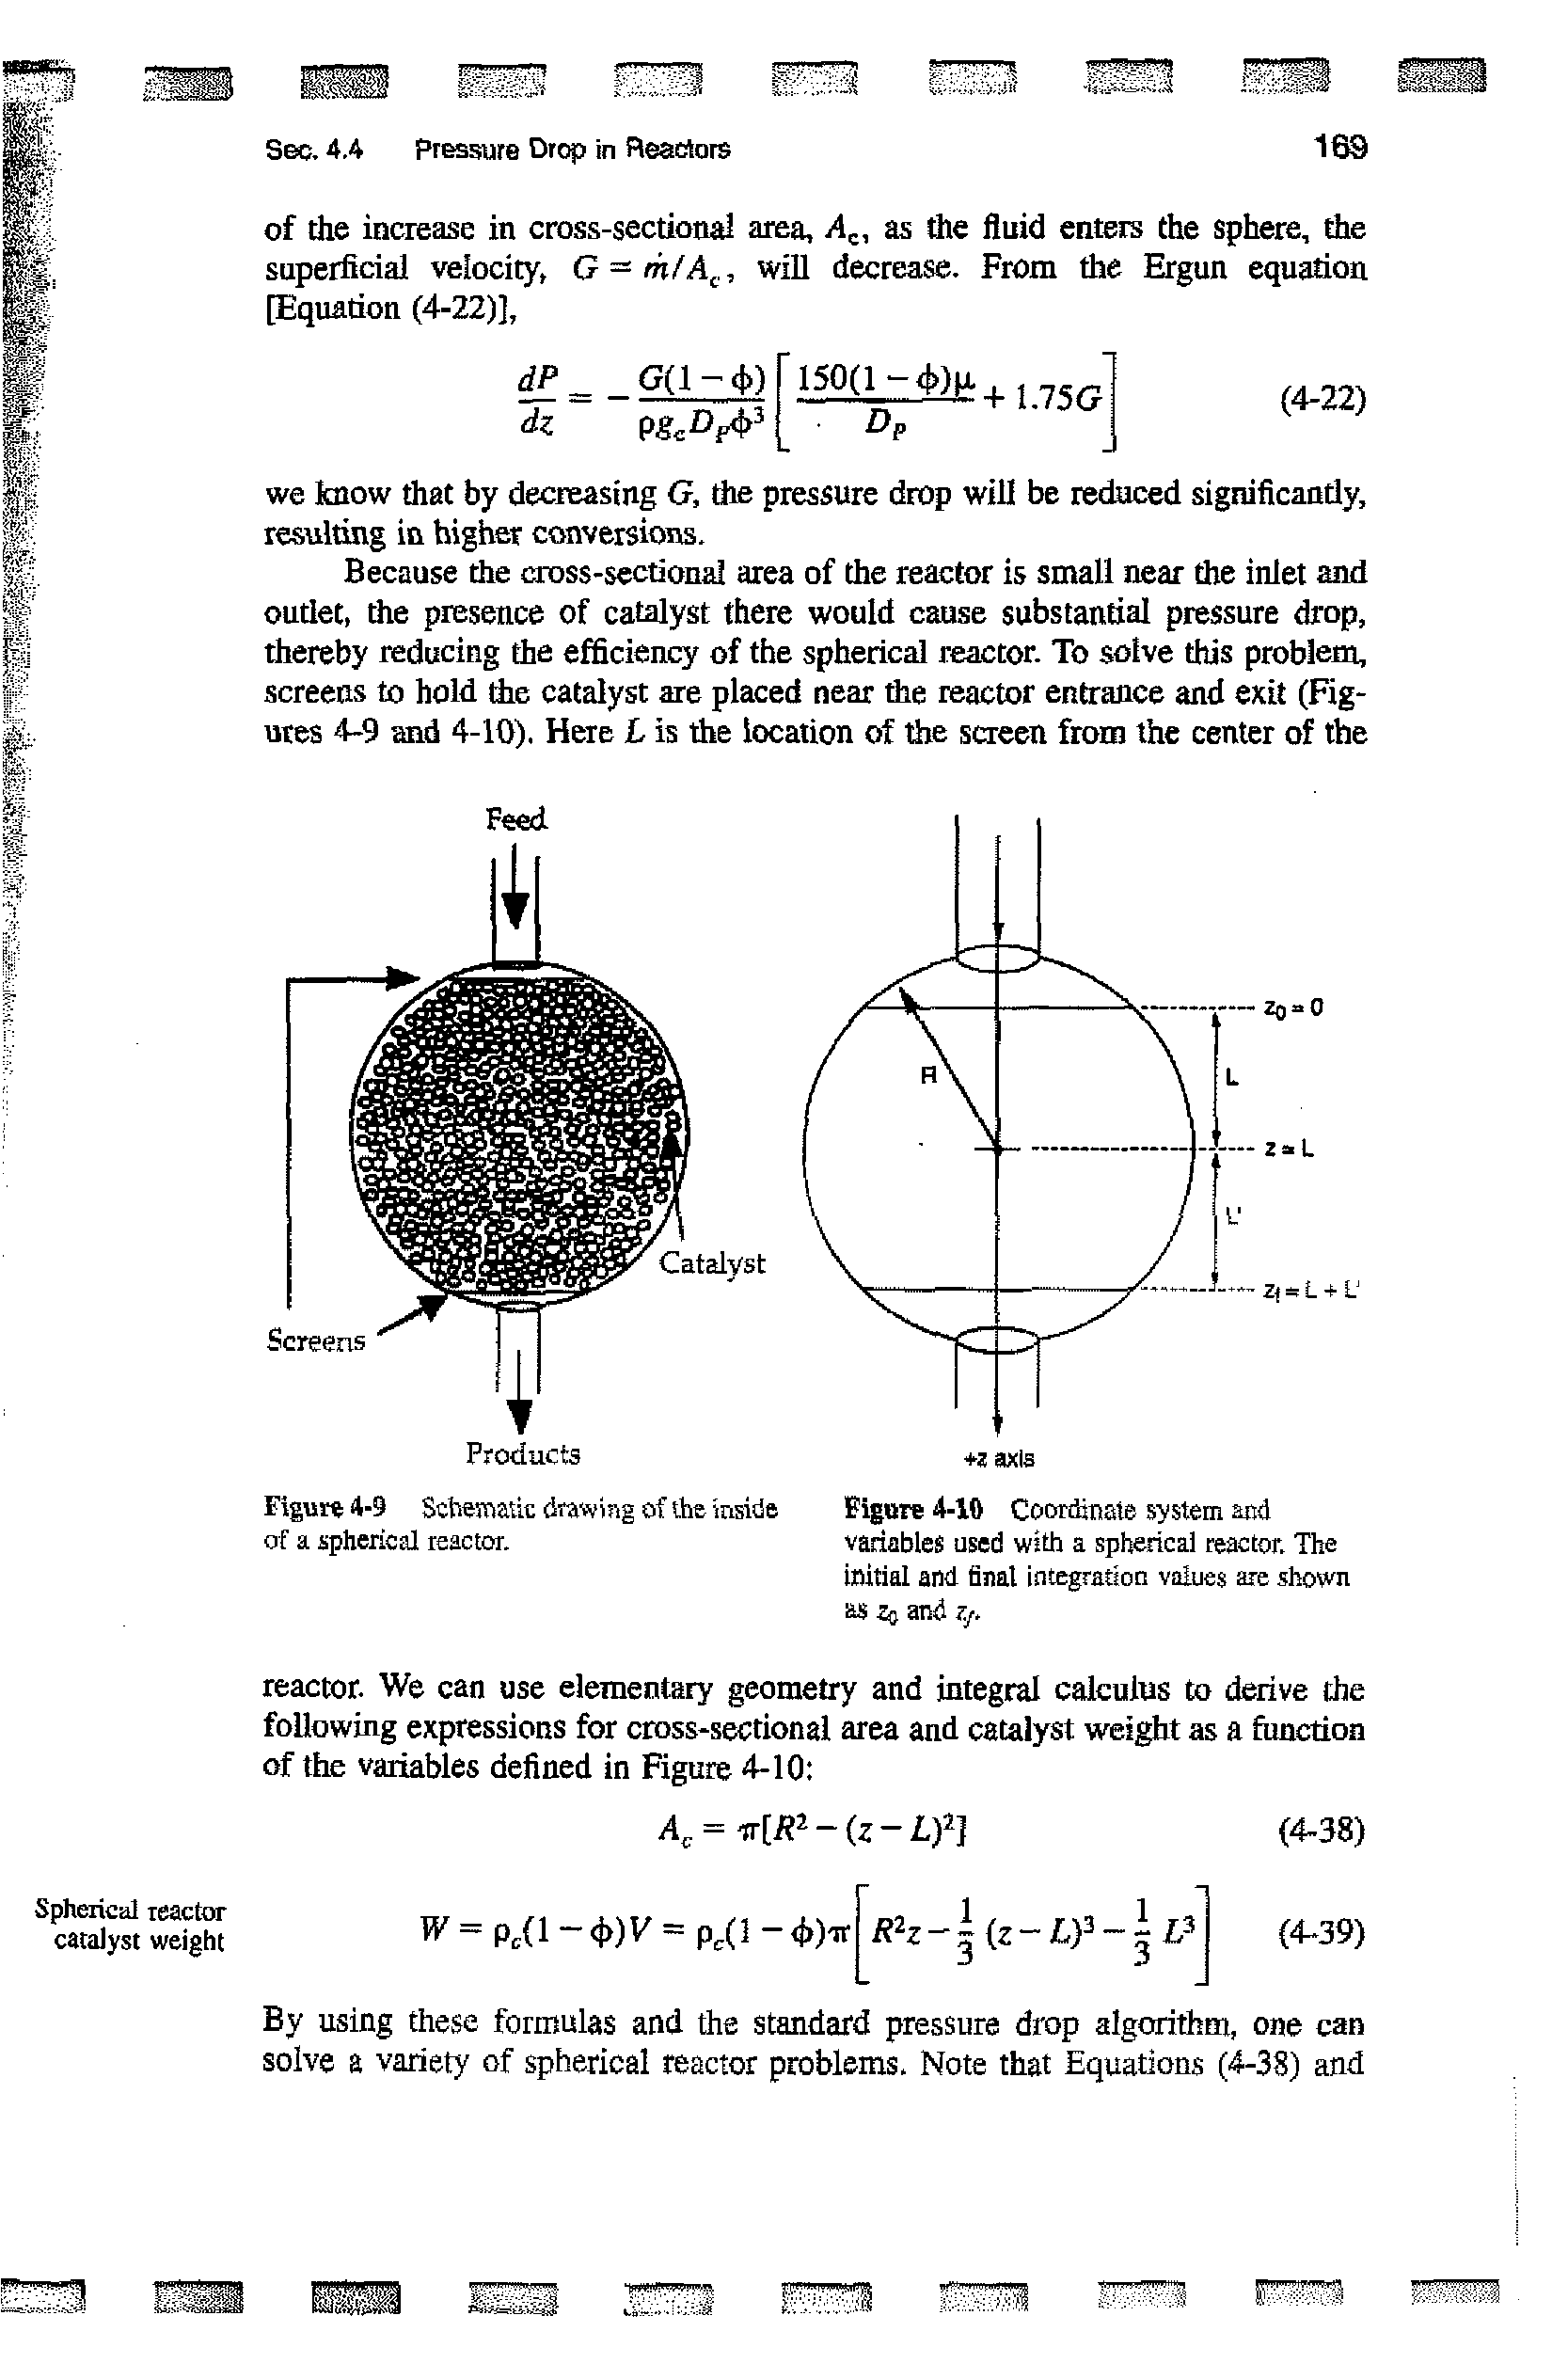 Figure 4-9 Sttetnatic drawing of the inside of a spherical reactor.